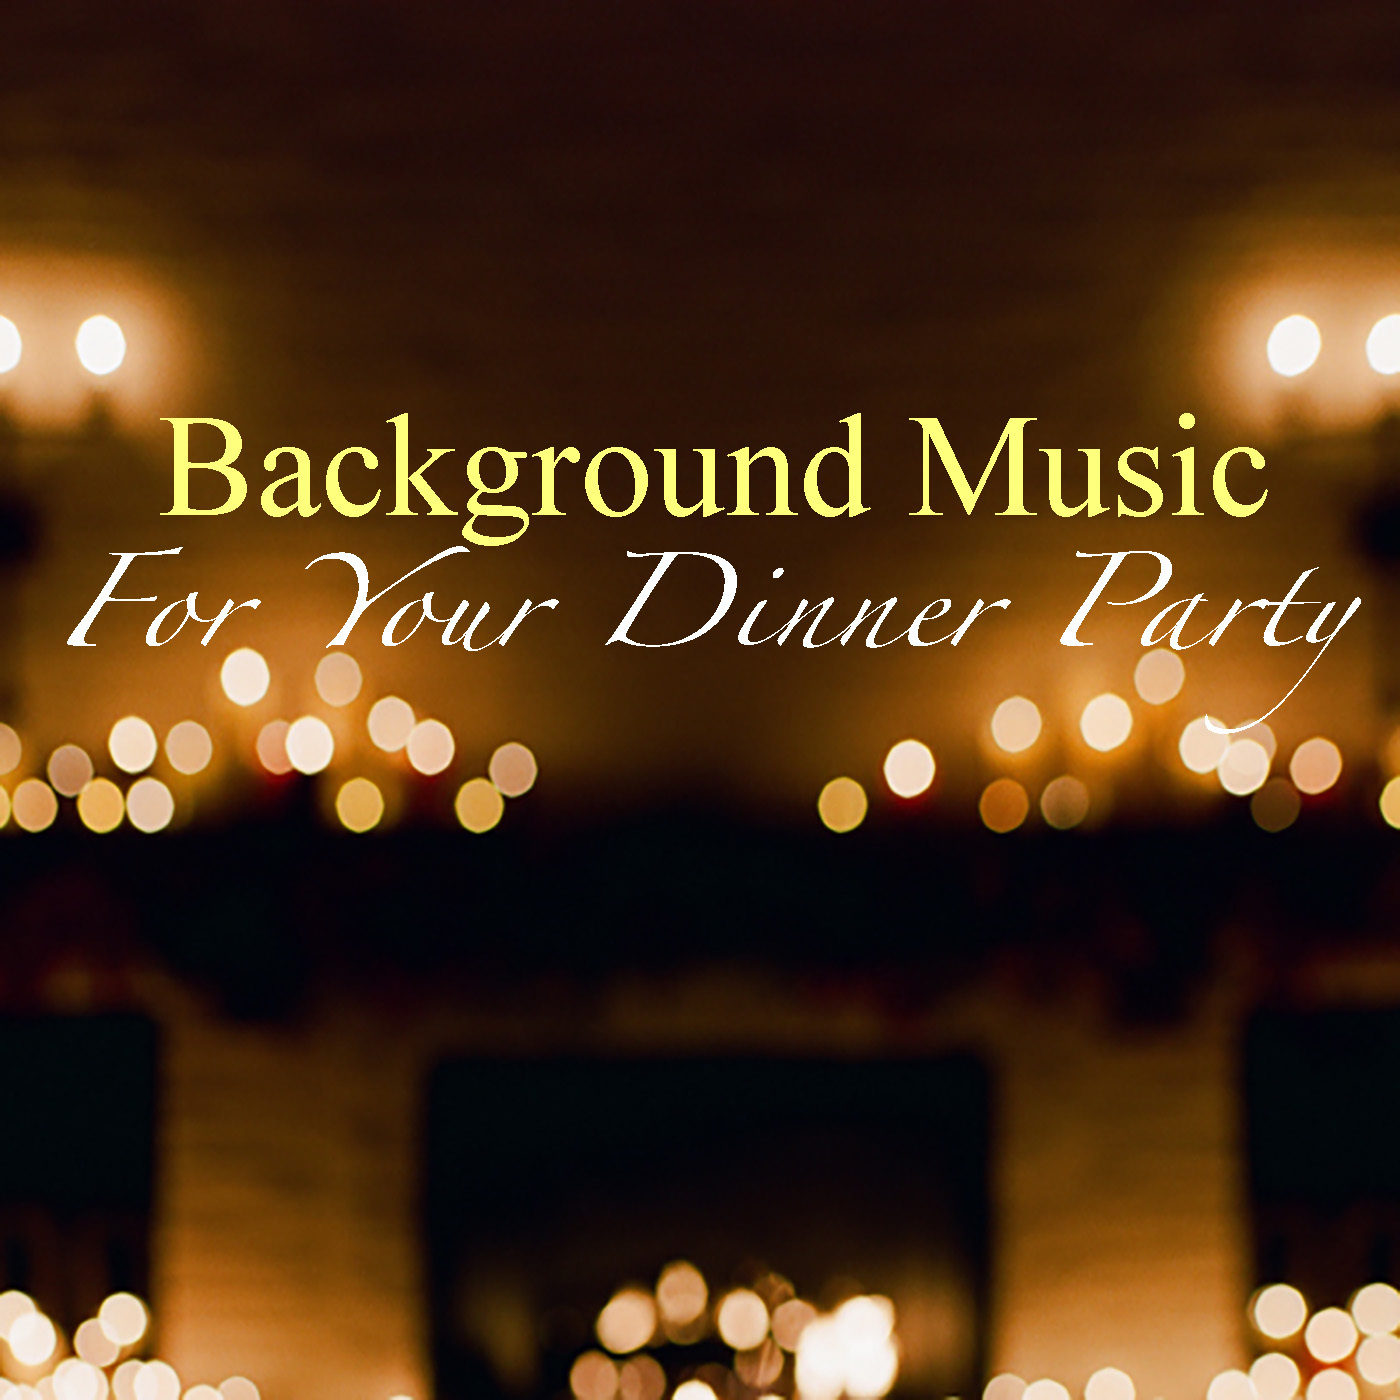 Background Music For Your Dinner Party